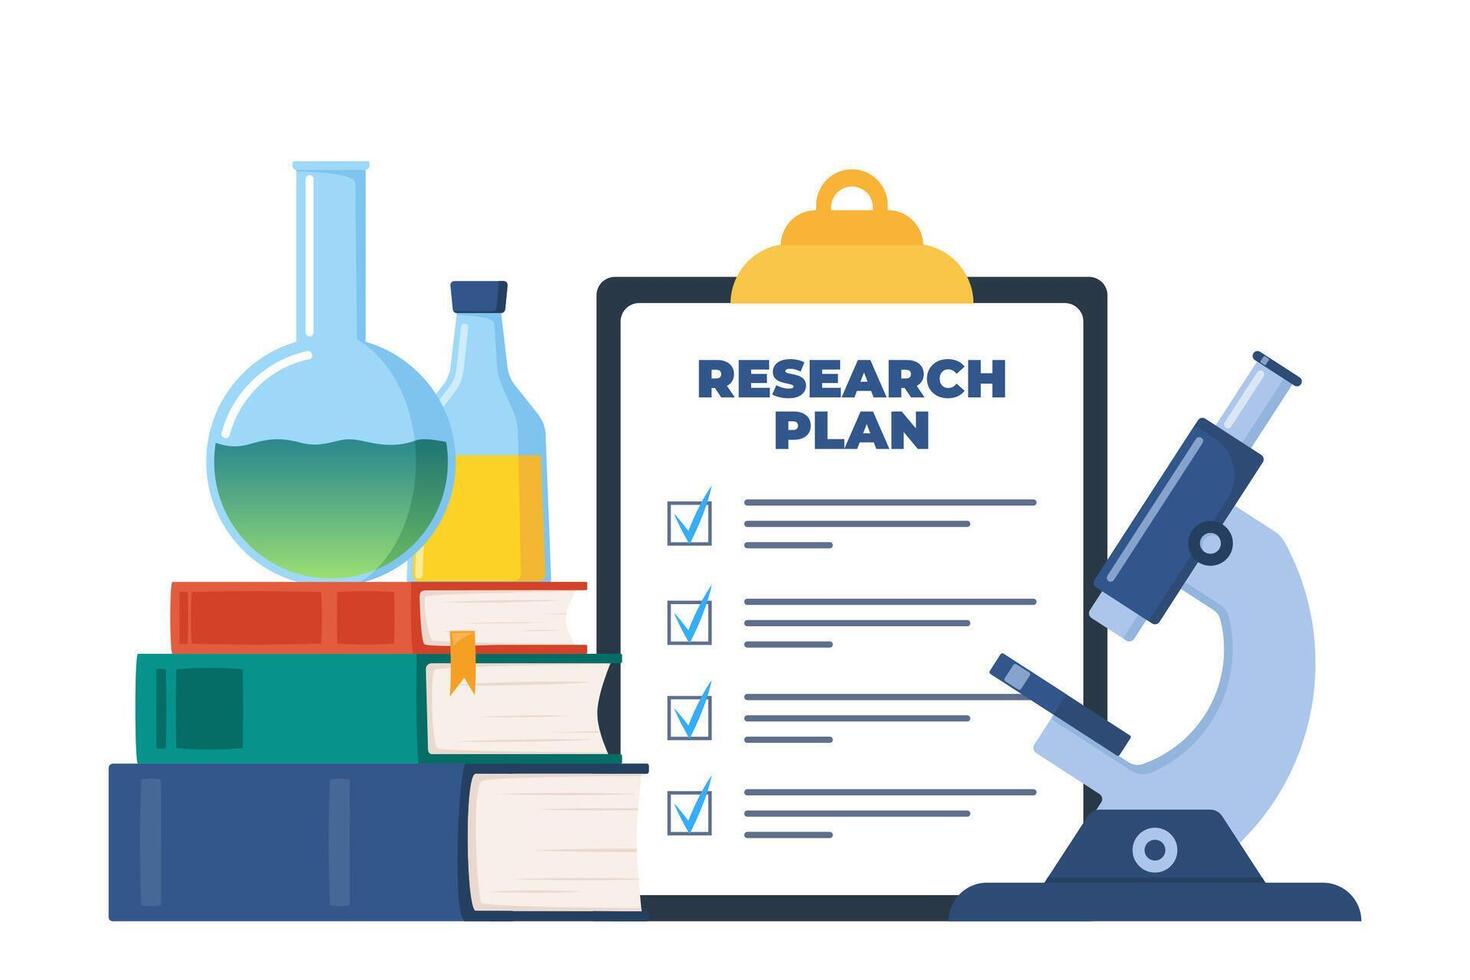 Chemical laboratory research plan on clipboard with checklist. Chemical Laboratory equipment and books. Lab research, testing, studies in chemistry. Vector illustration.